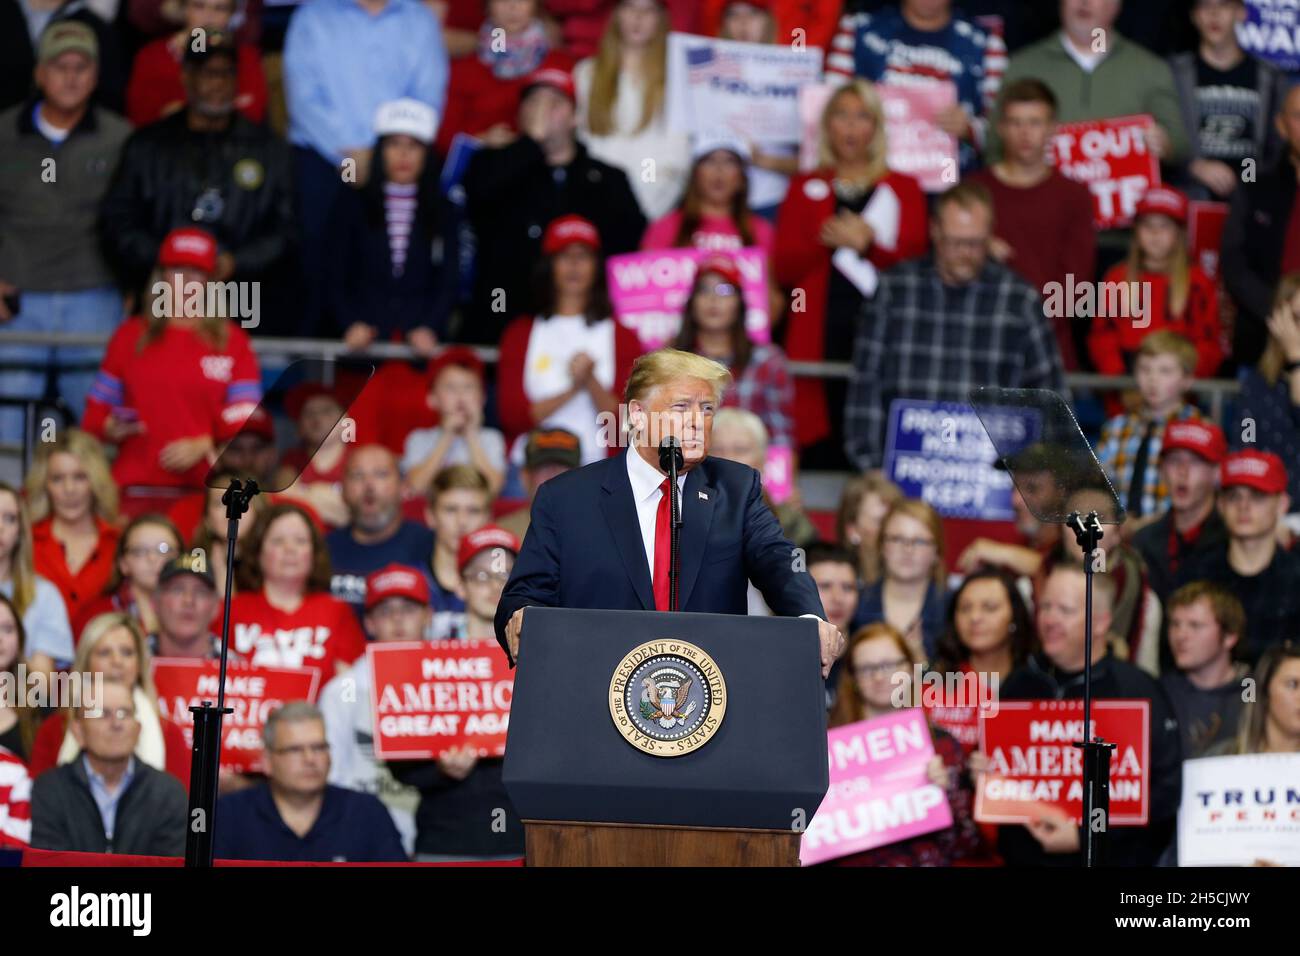 11052018 - Fort Wayne, Indiana, USA: United States President Donald J. Trump campaigns for Indiana congressional candidates, including Mike Braun, who is running for senate, during a Make America Great Again! rally at the Allen County War Memorial Coliseum in Fort Wayne, Indiana. Stock Photo